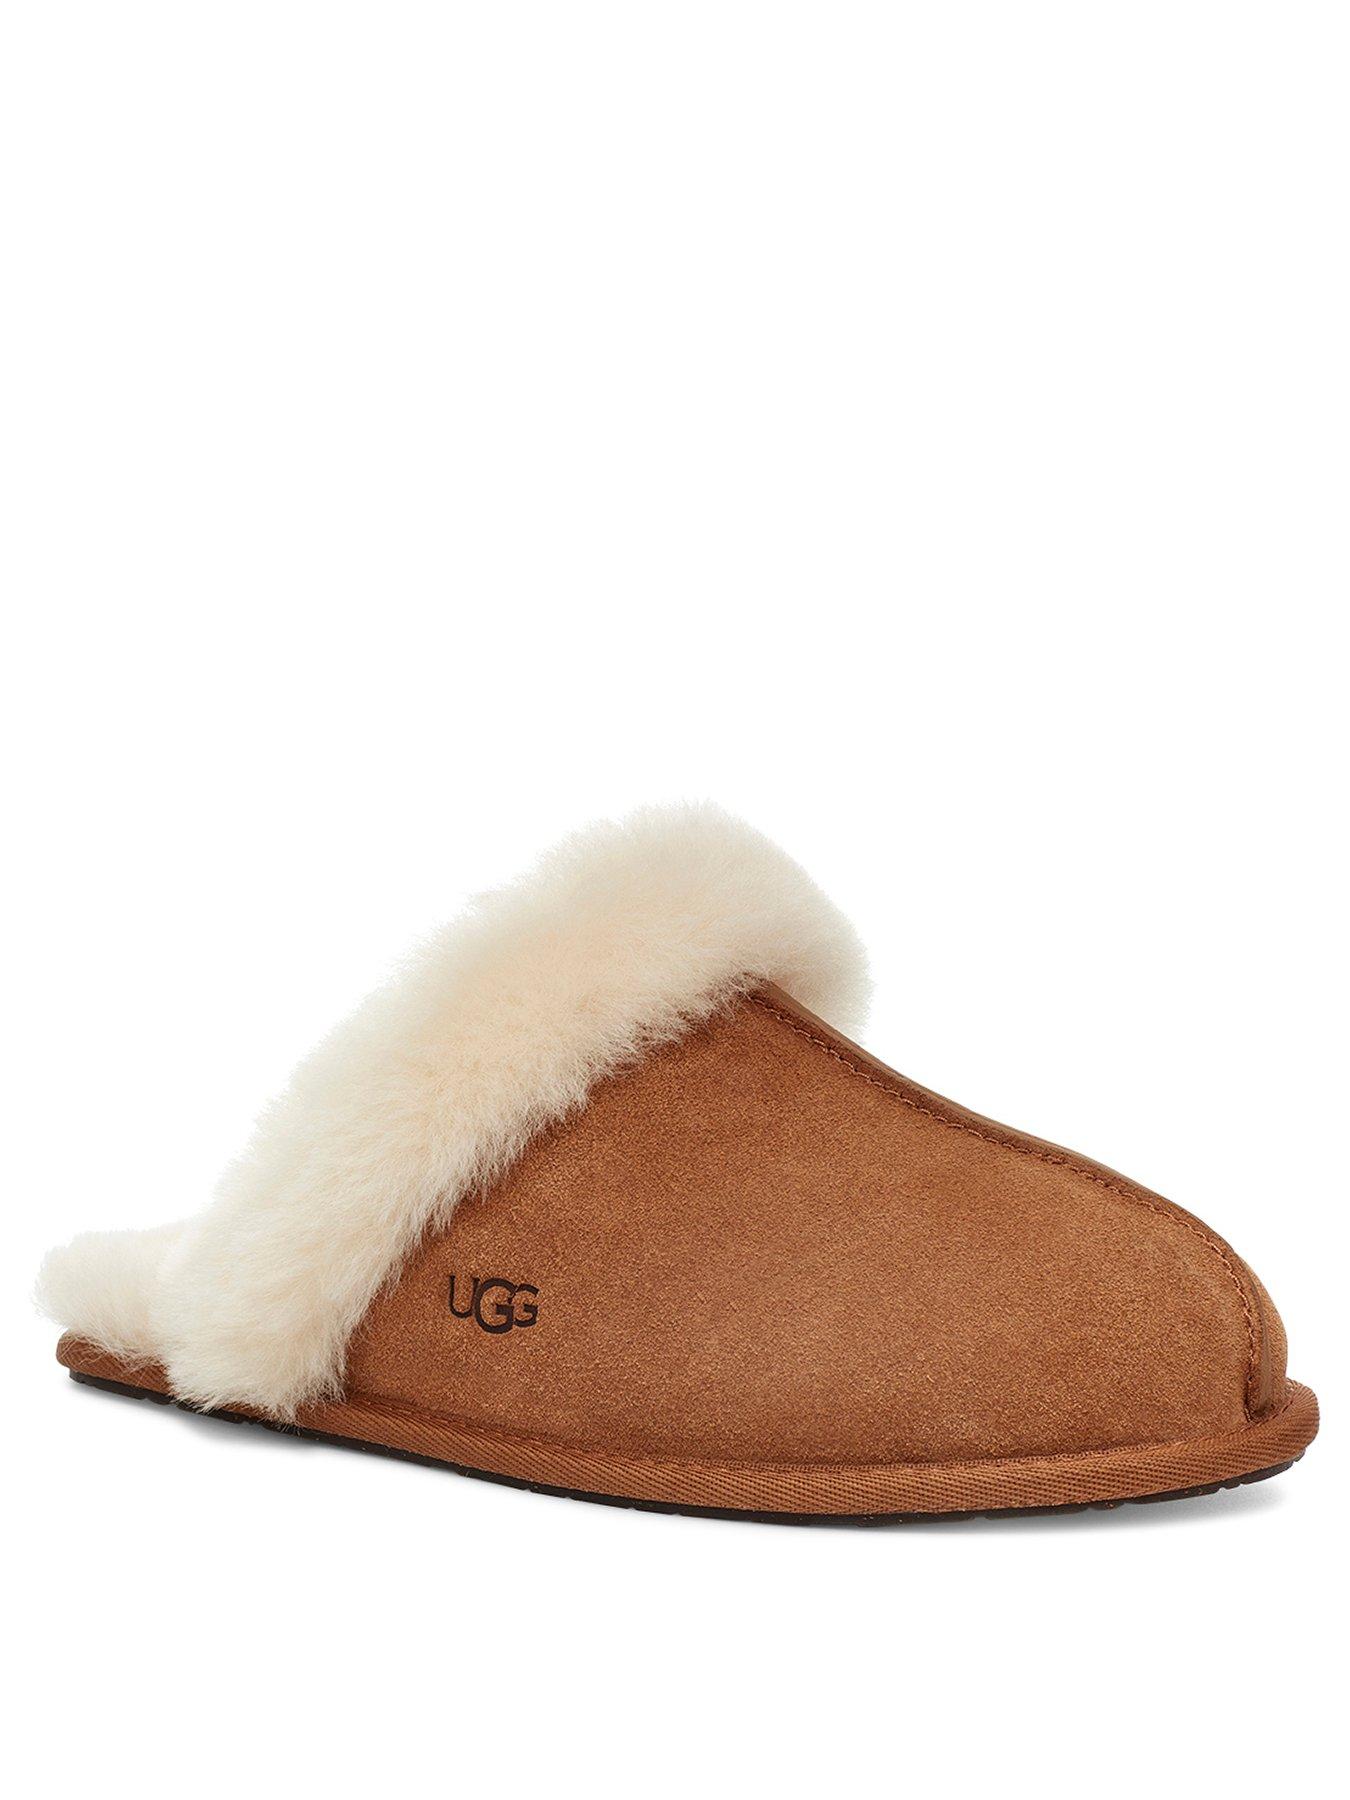 ugg slippers mules Cheaper Than Retail 